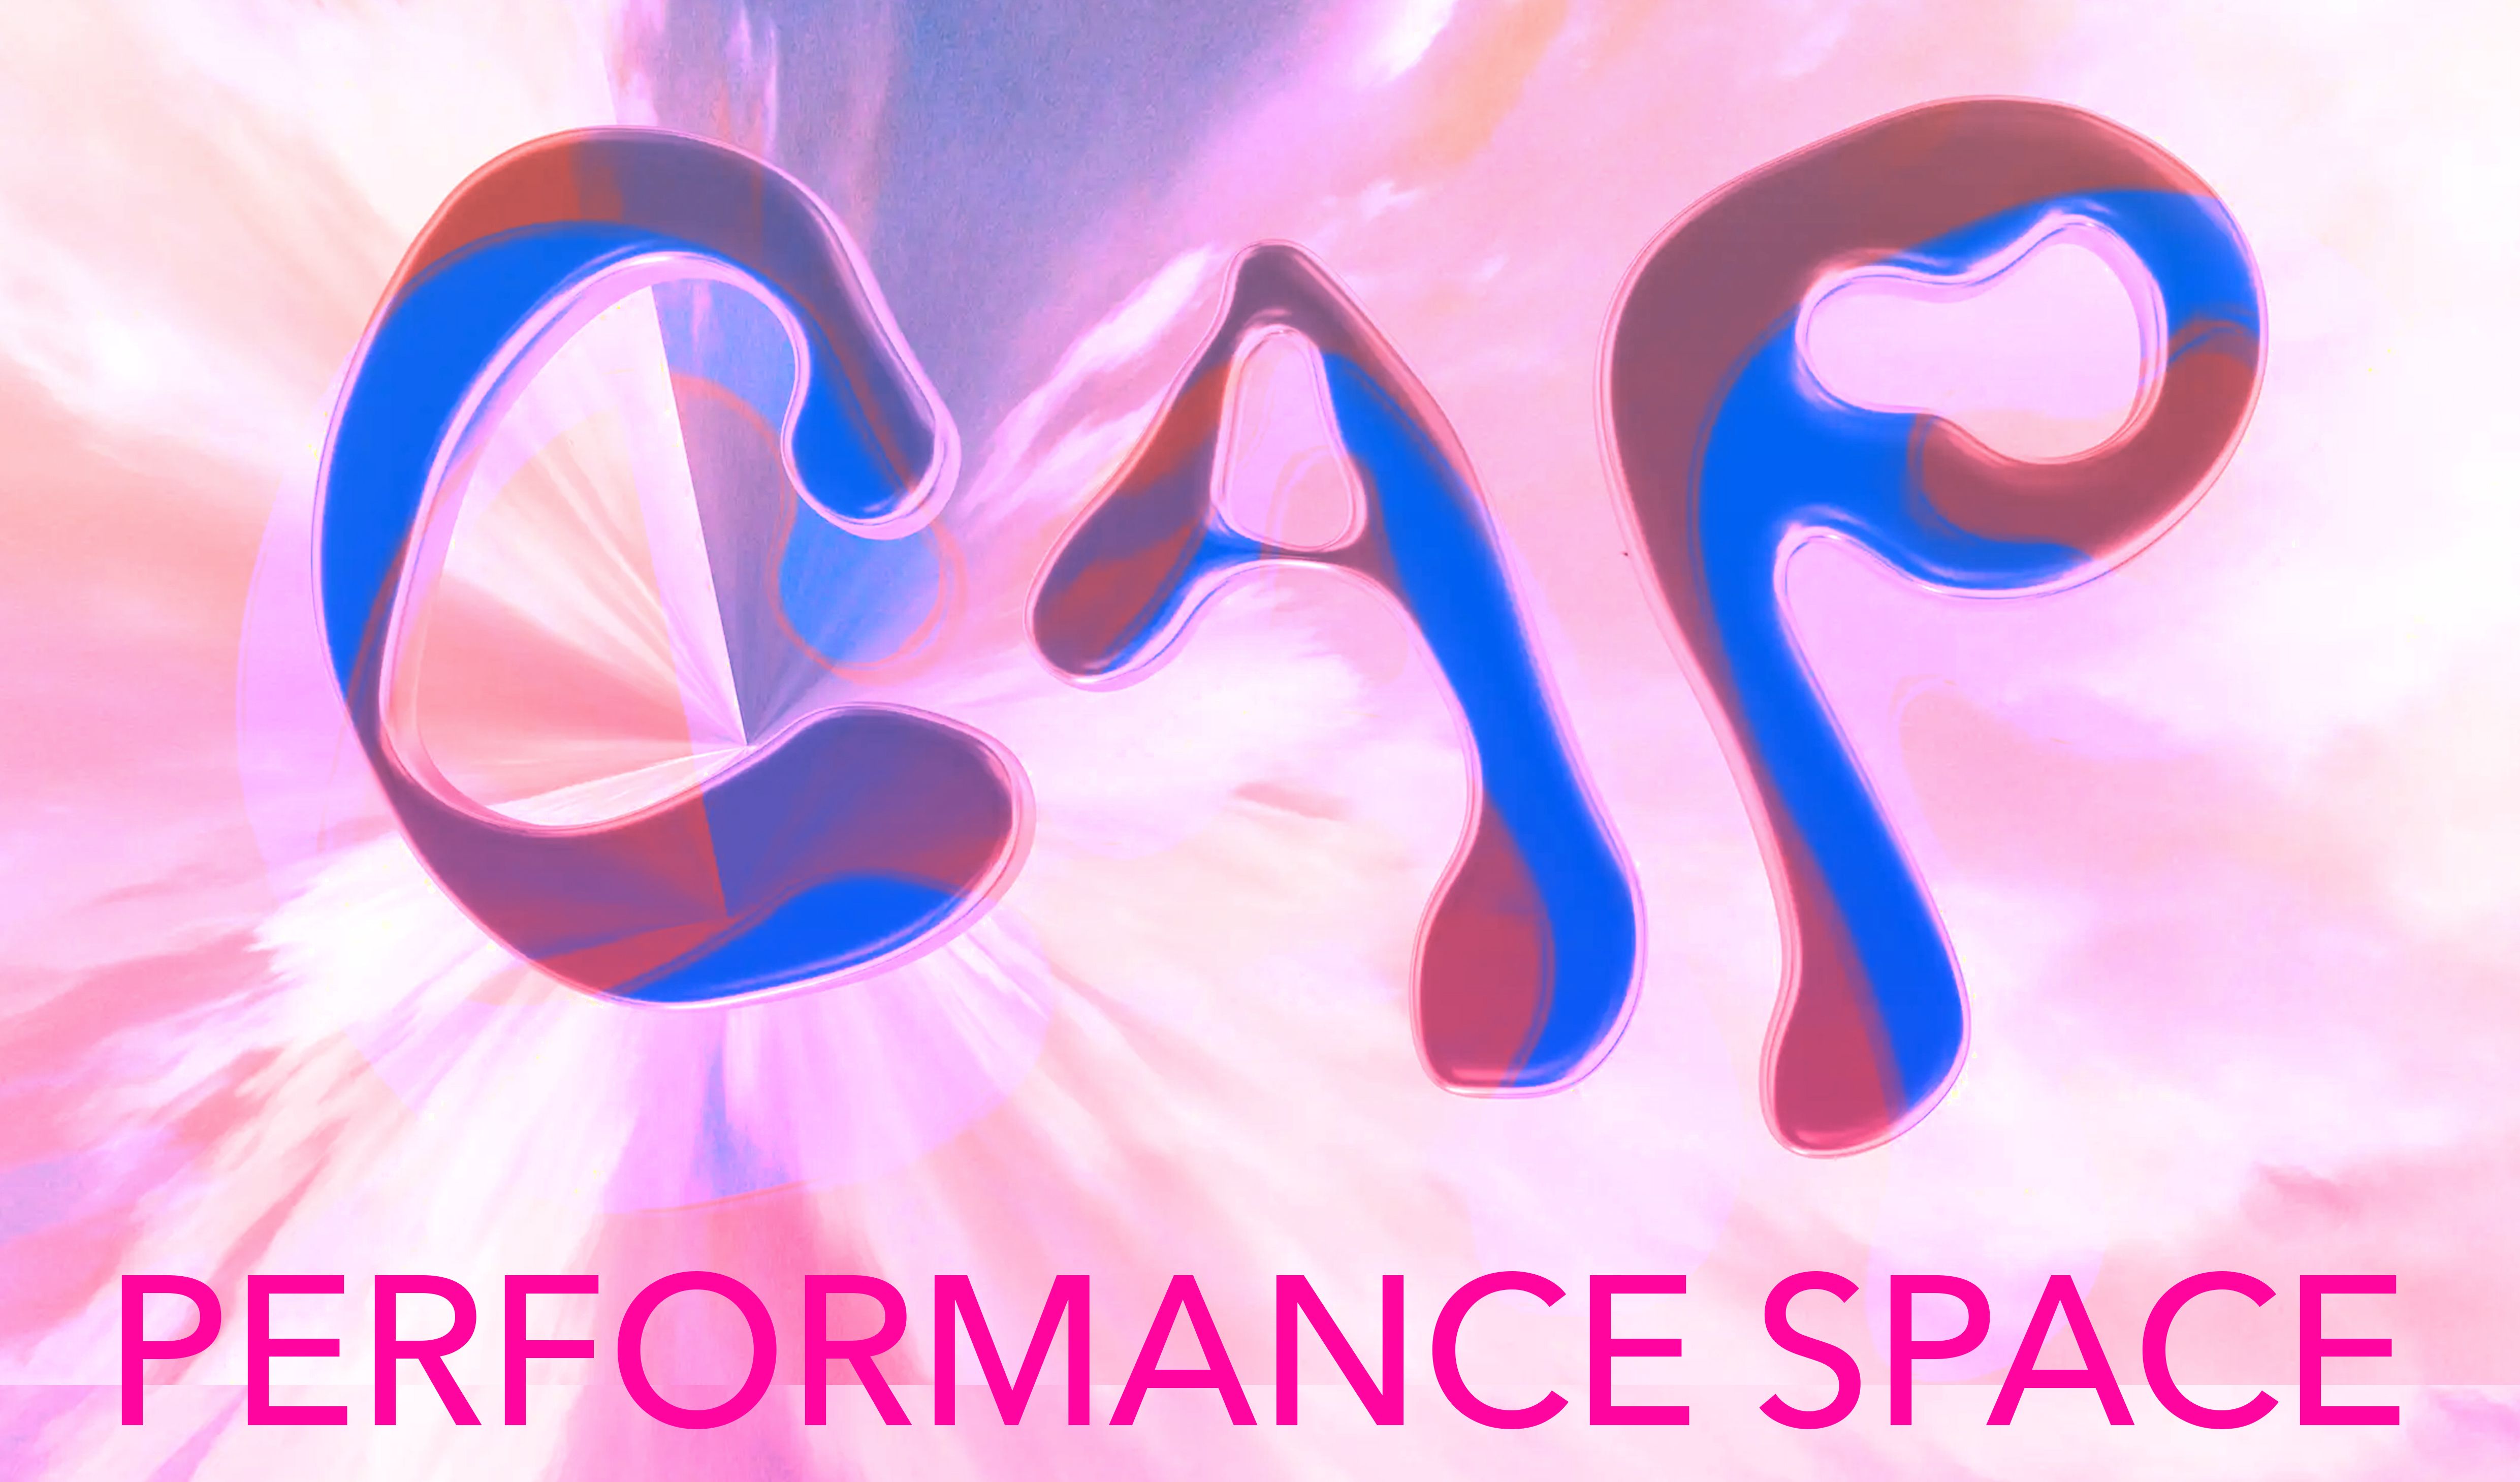 Image of the letters C, A and P in curvy lettering, and pink text reading 'Performance Space', on top of a blue and white swirly background.